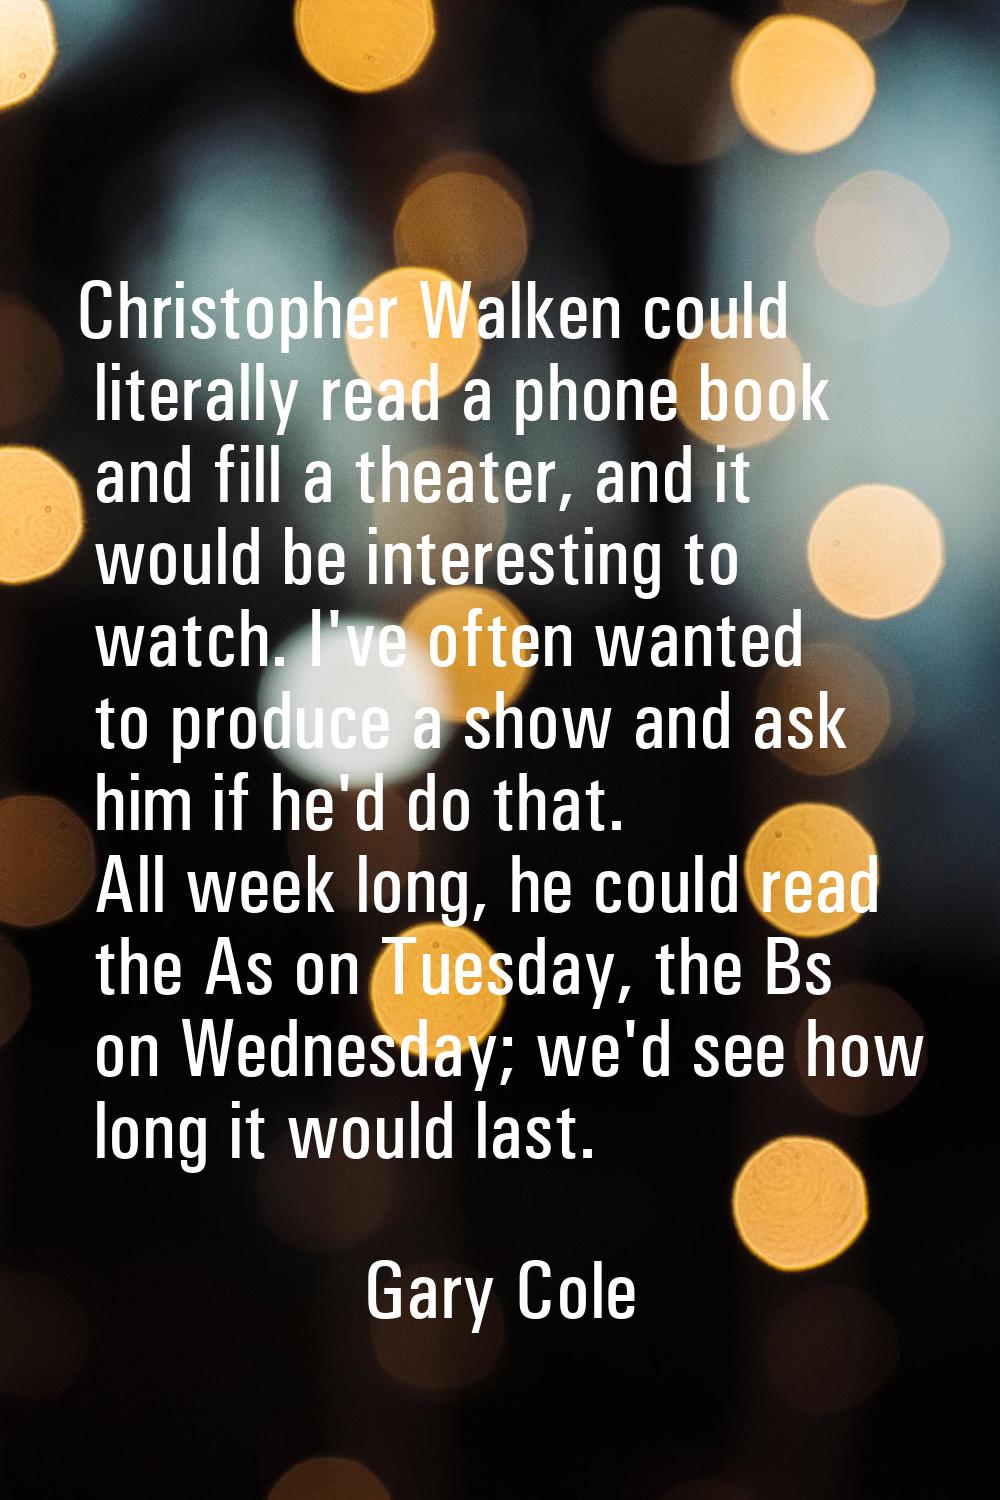 Christopher Walken could literally read a phone book and fill a theater, and it would be interestin